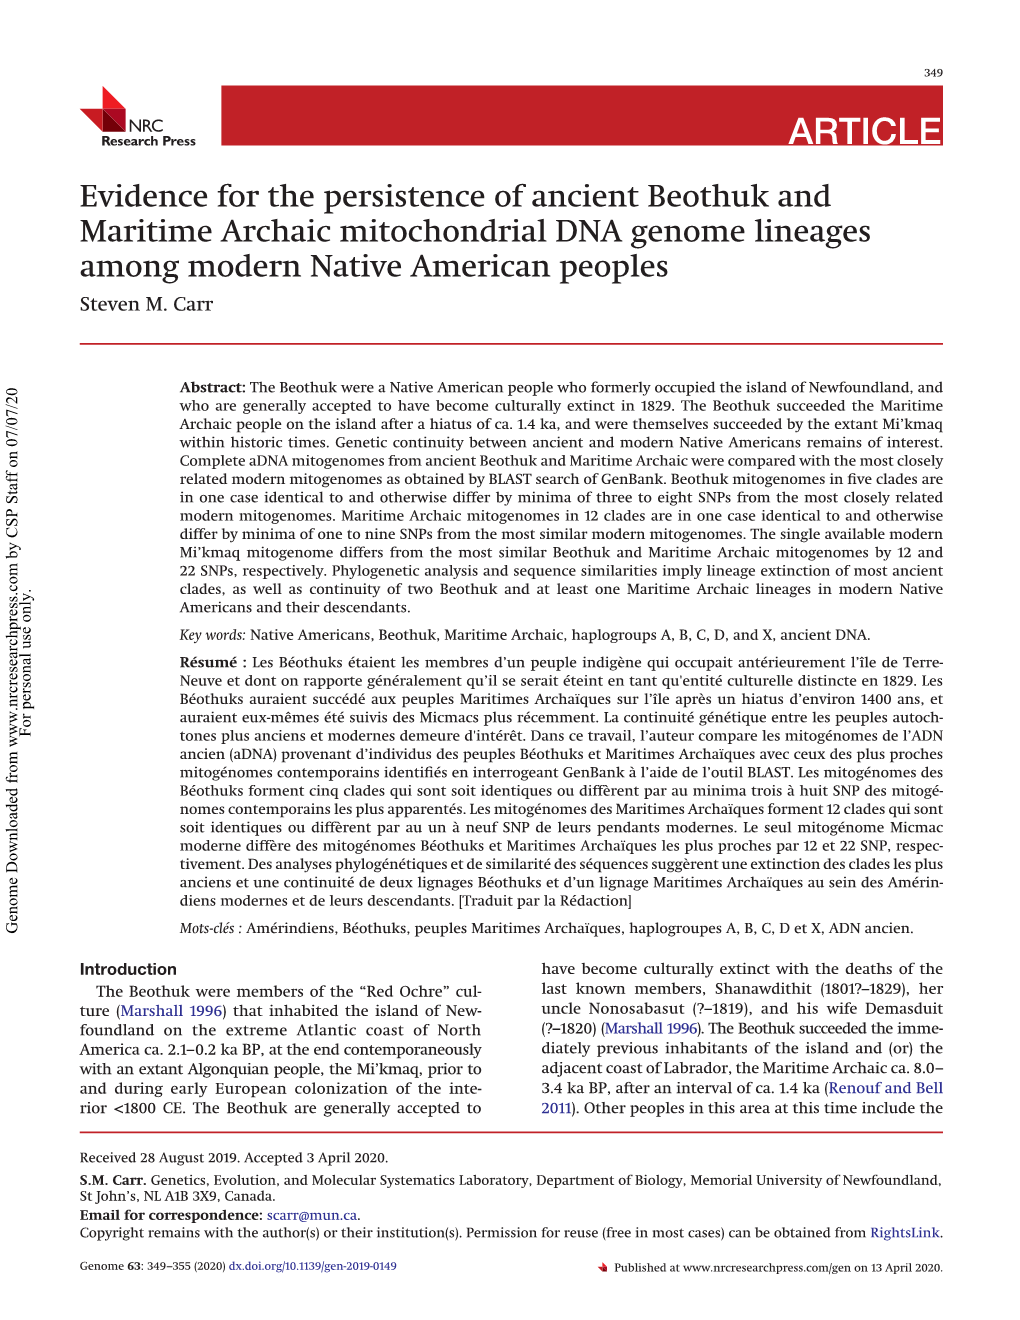 Evidence for the Persistence of Ancient Beothuk and Maritime Archaic Mitochondrial DNA Genome Lineages Among Modern Native American Peoples Steven M